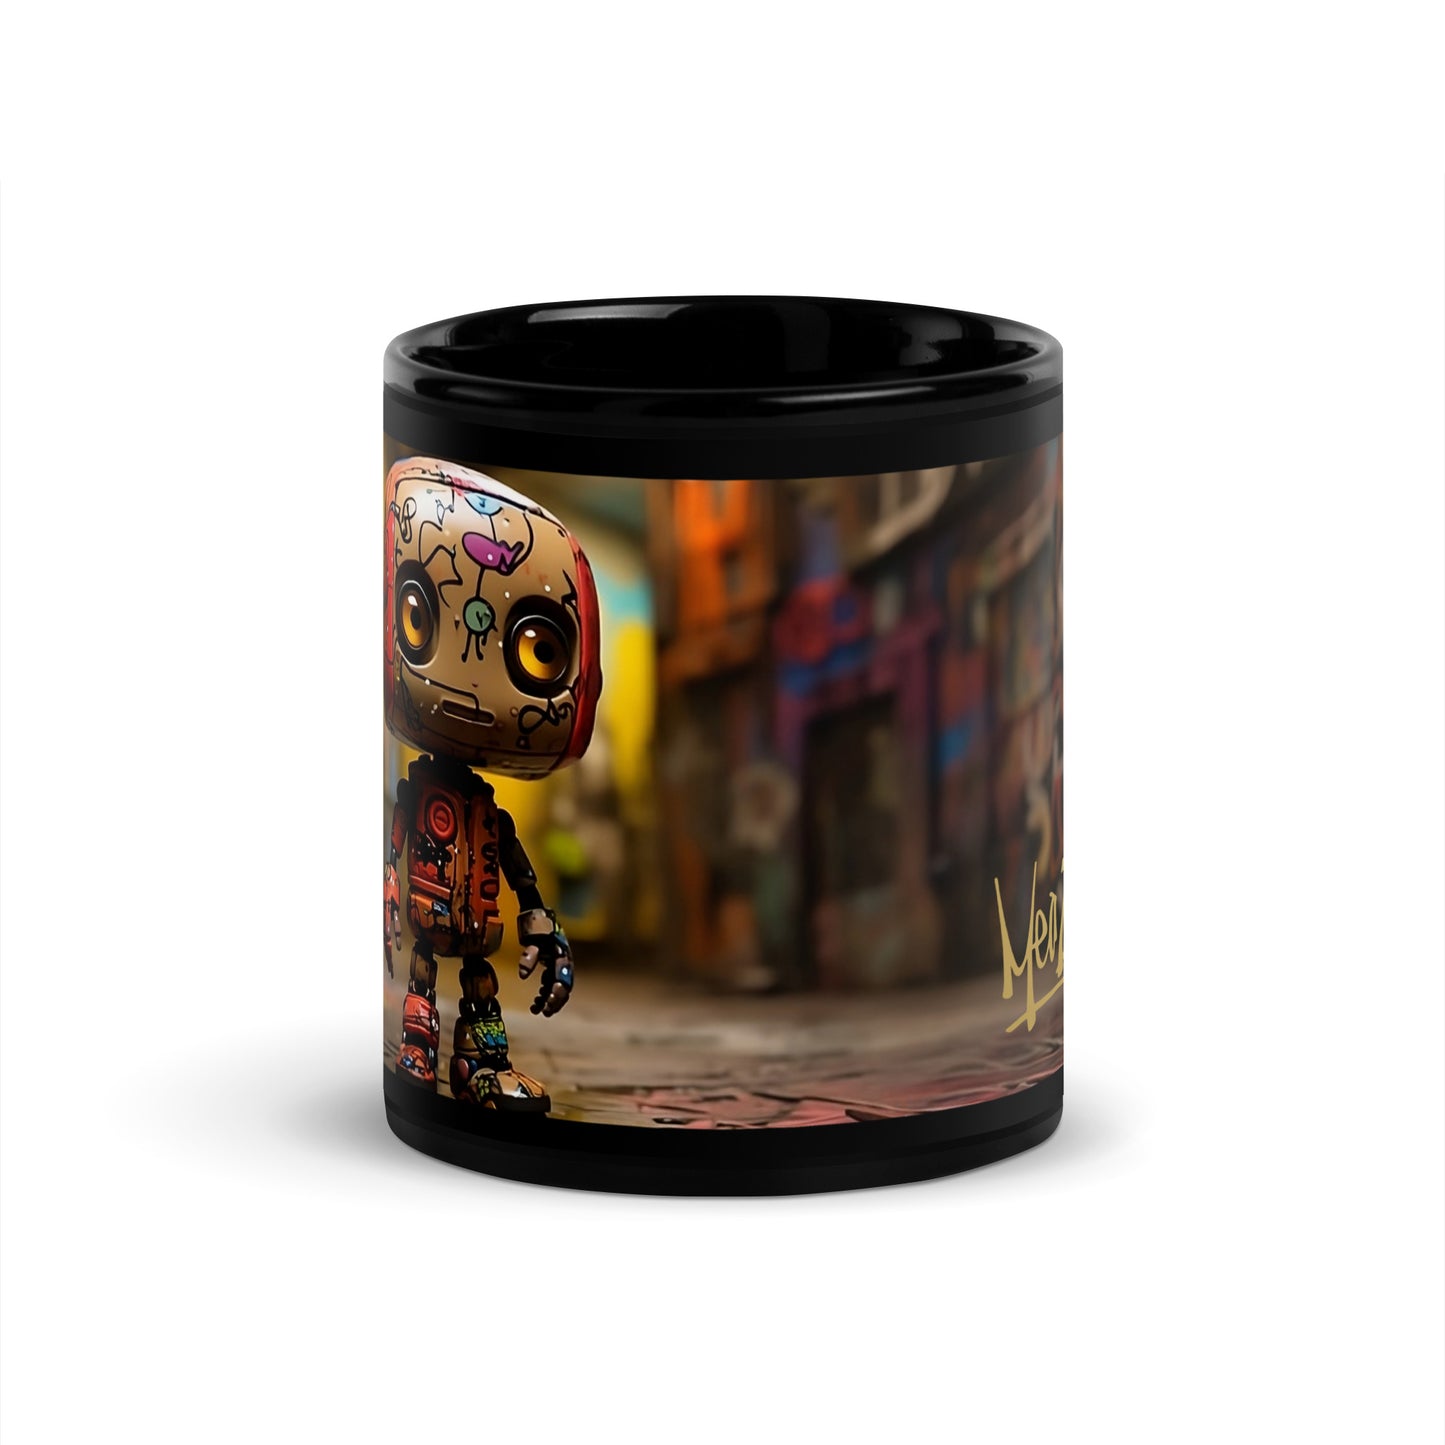 Elevate your coffee or tea experience with the MeaKulpa Bad Bot Gold Logo Black Glossy Mug. This sleek and sophisticated mug boasts a glossy black finish, creating a canvas for the rebellious charm of Bad Bot and the gleaming MeaKulpa gold logo.